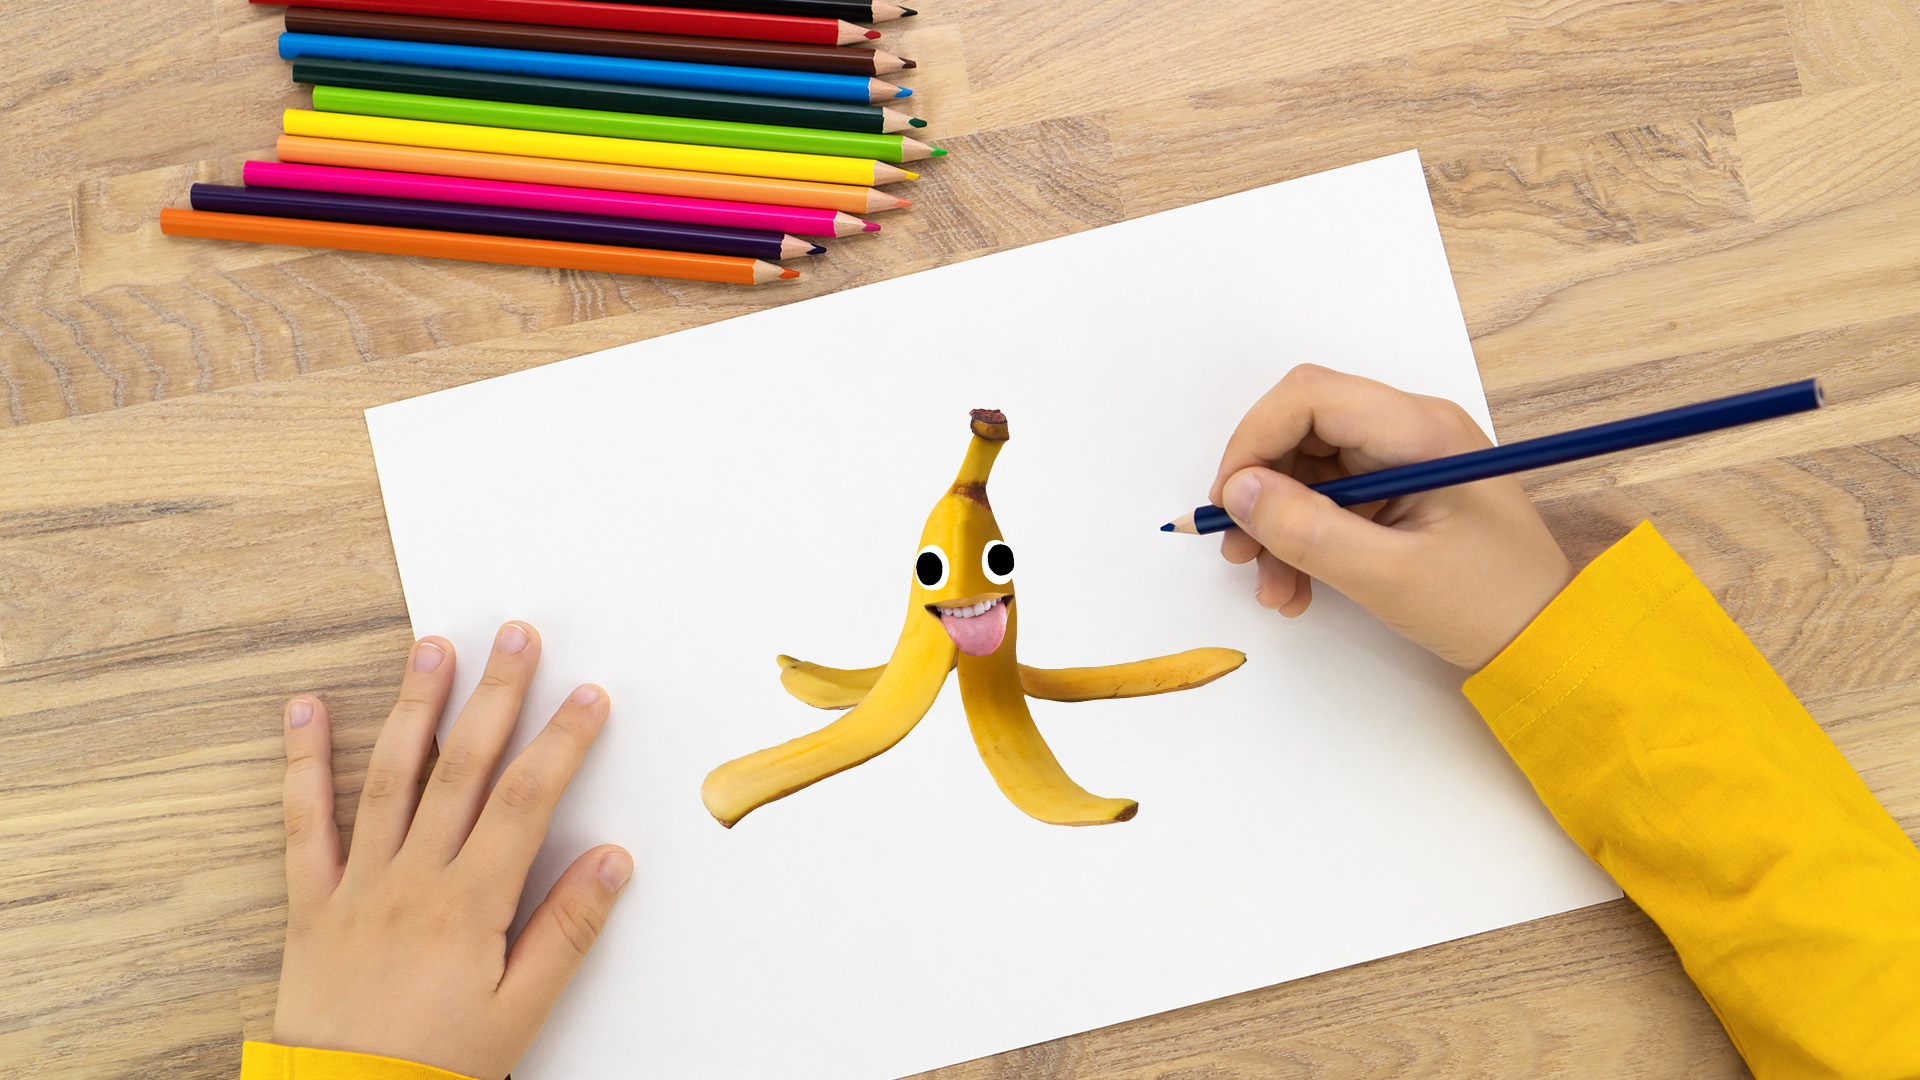 A drawing of a banana using coloured pencils 